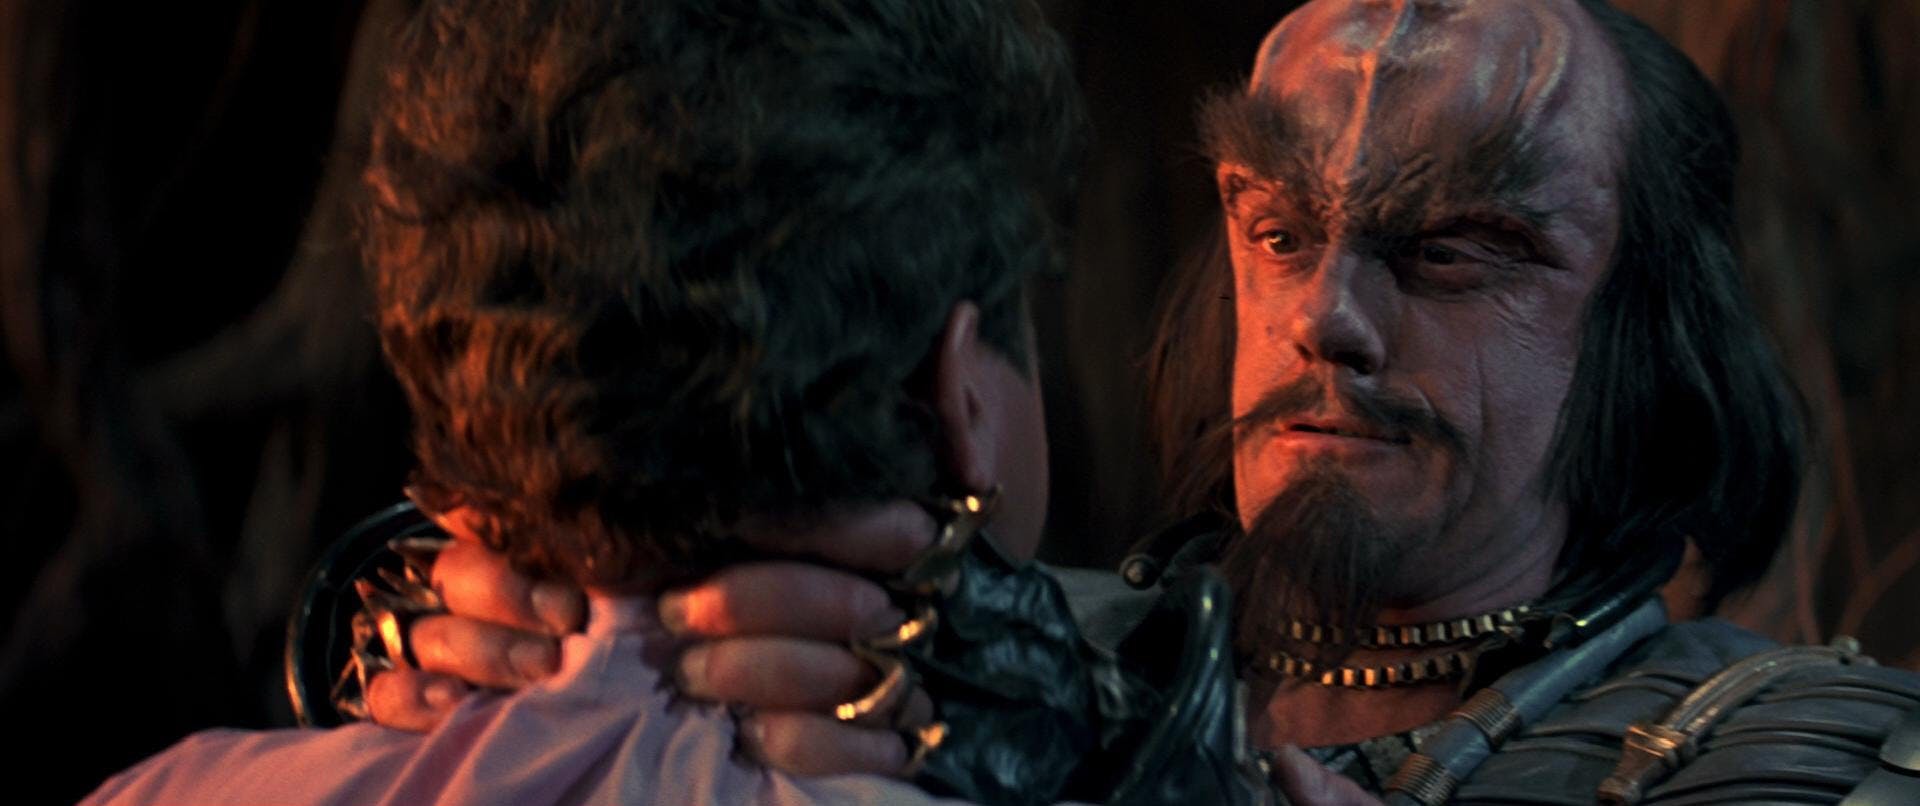 Still of Christopher Lloyd as Kruge with both of his hands around Kirk's neck choking him in Star Trek III: The Search for Spock